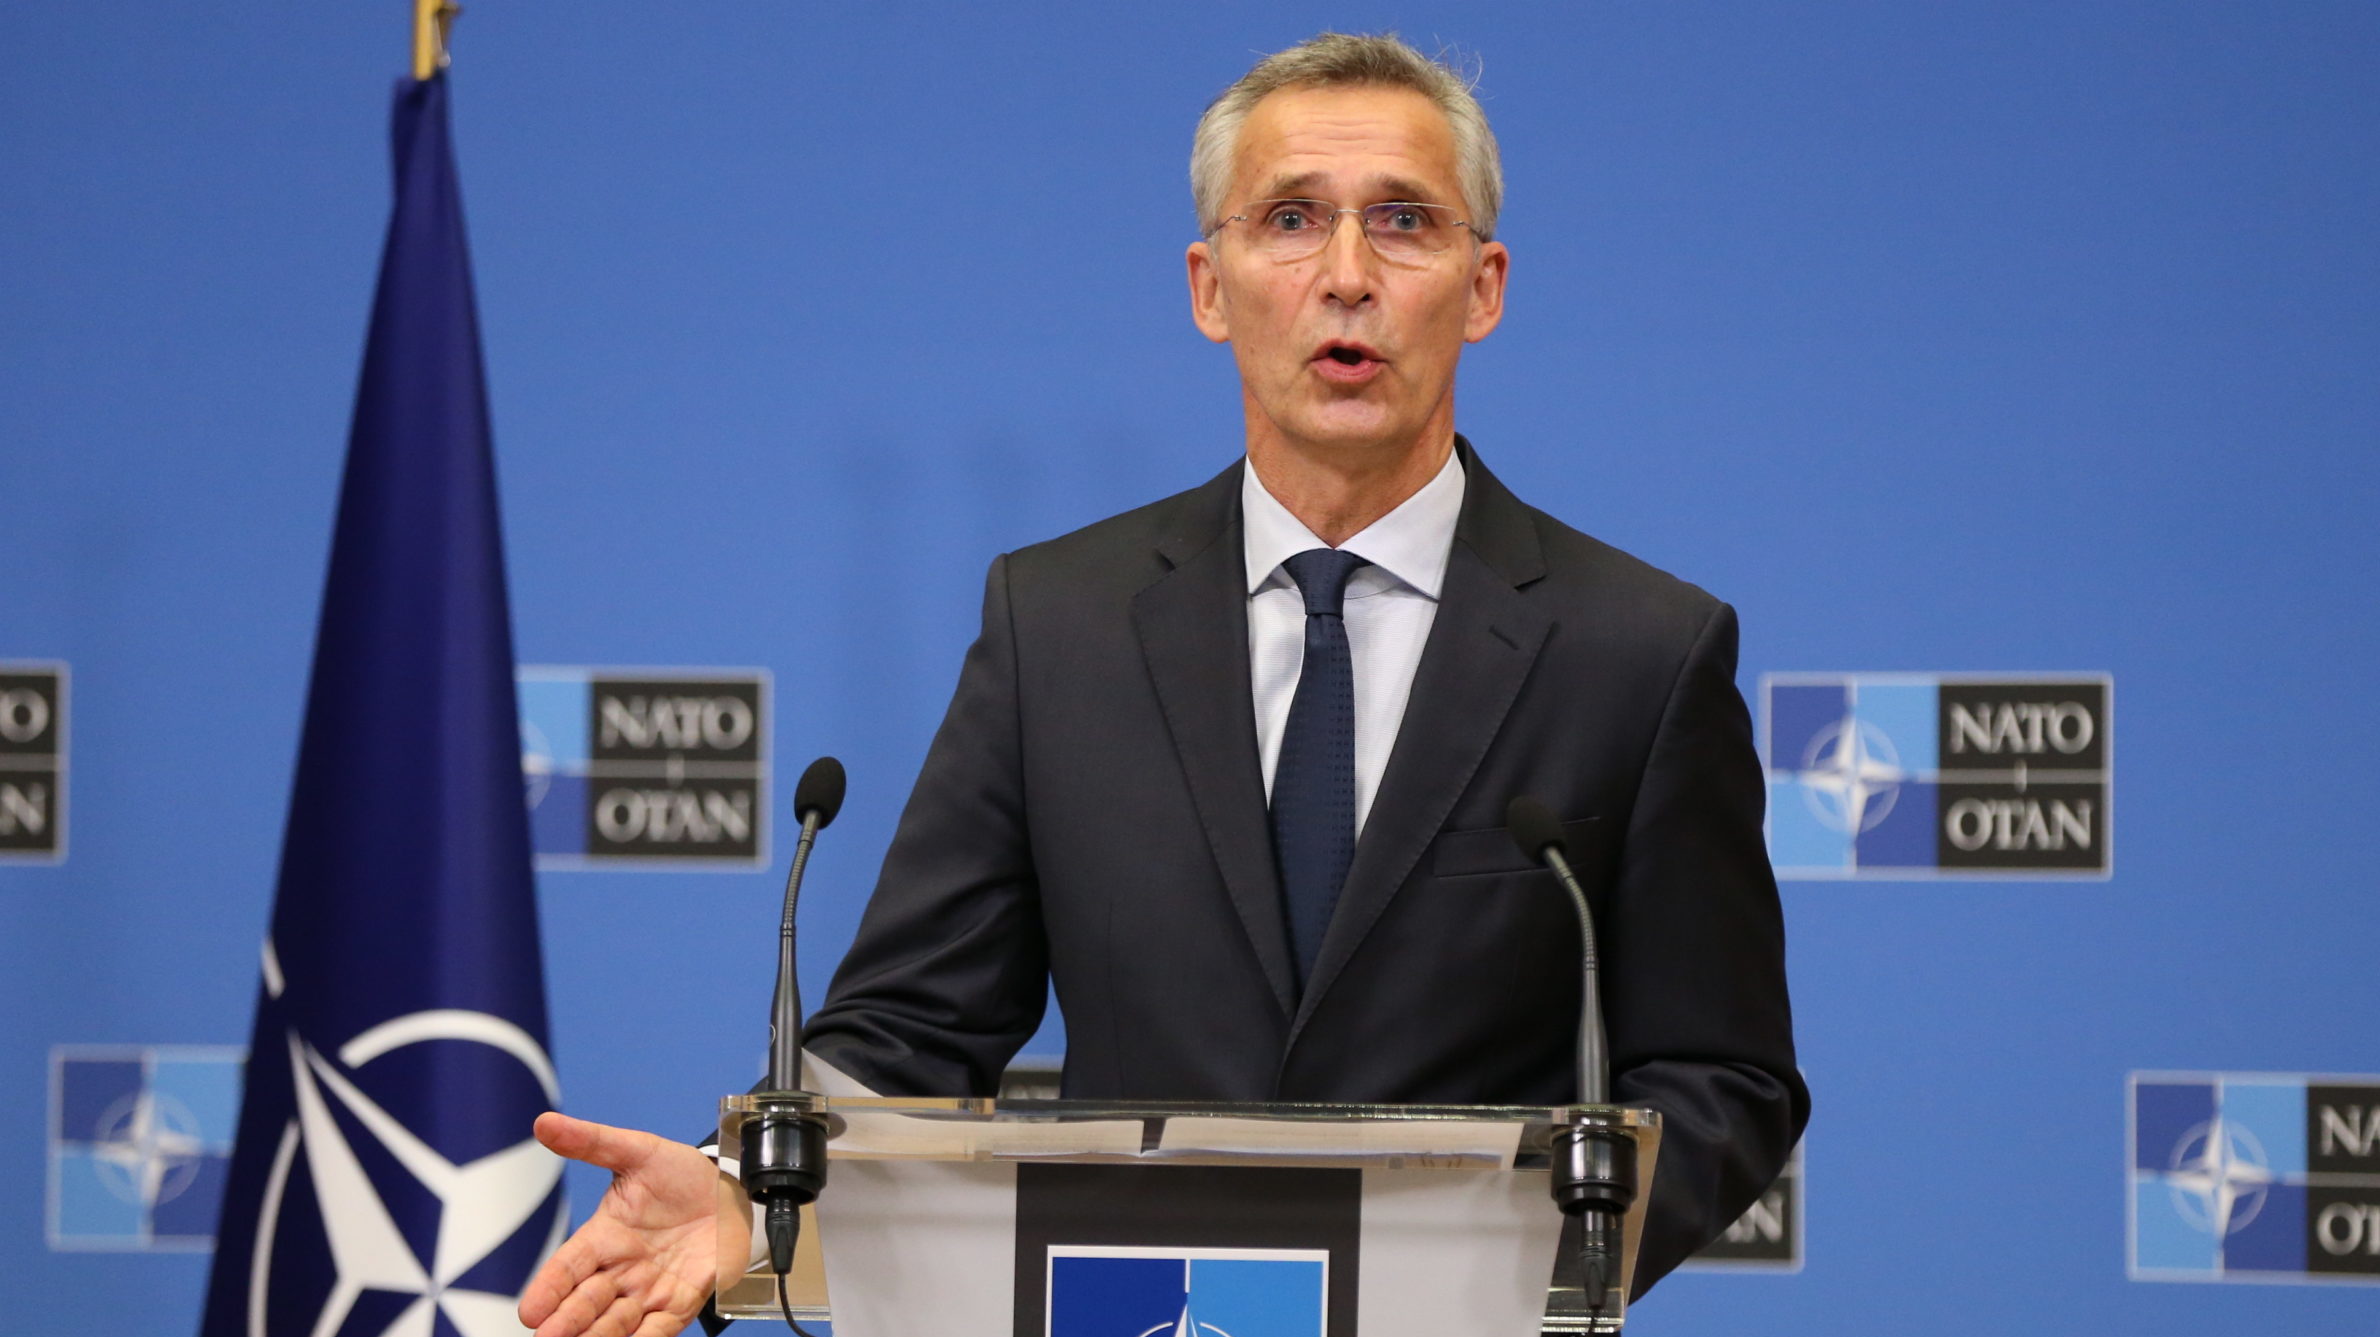 NATO Head: Afghan Exit to be Decided ‘Together’